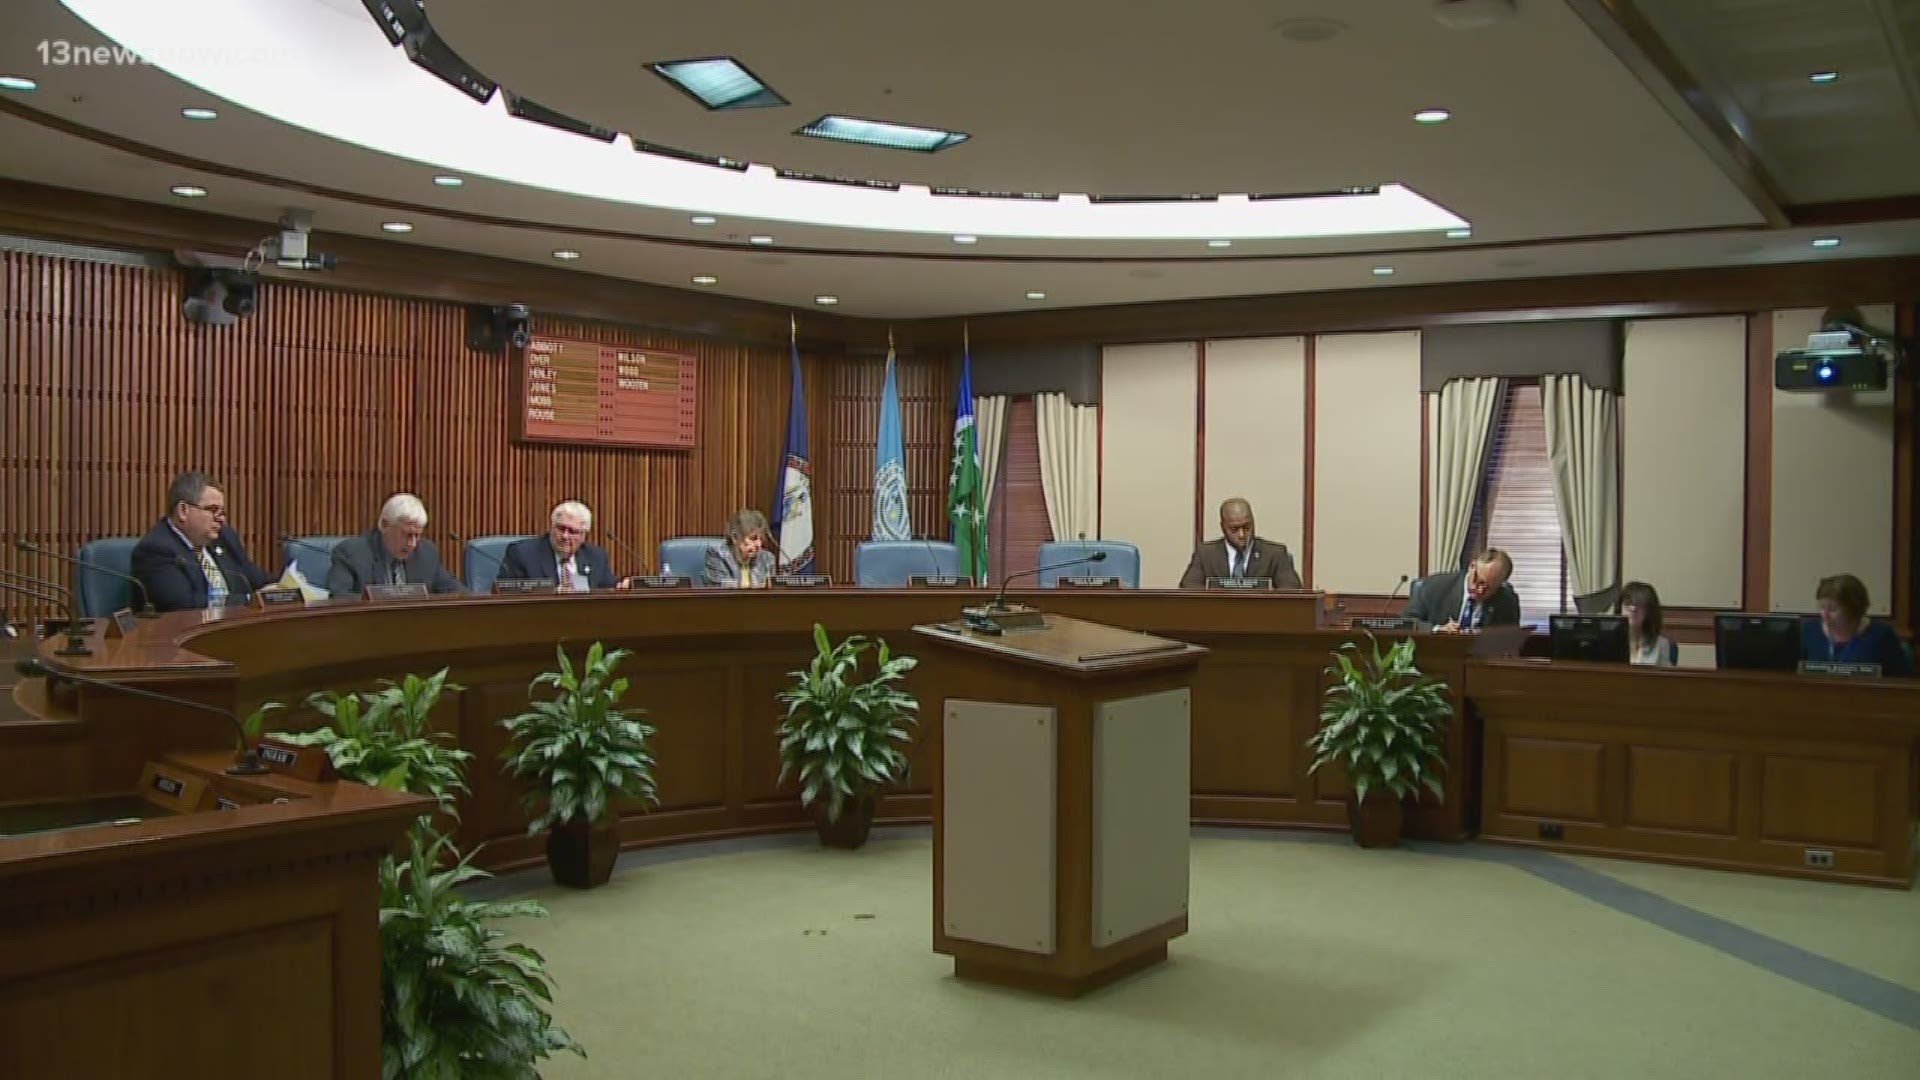 After former councilman John Uhrin withdrew his name to be considered for a council seat, Virginia Beach City Council will convene to appoint a new council member.